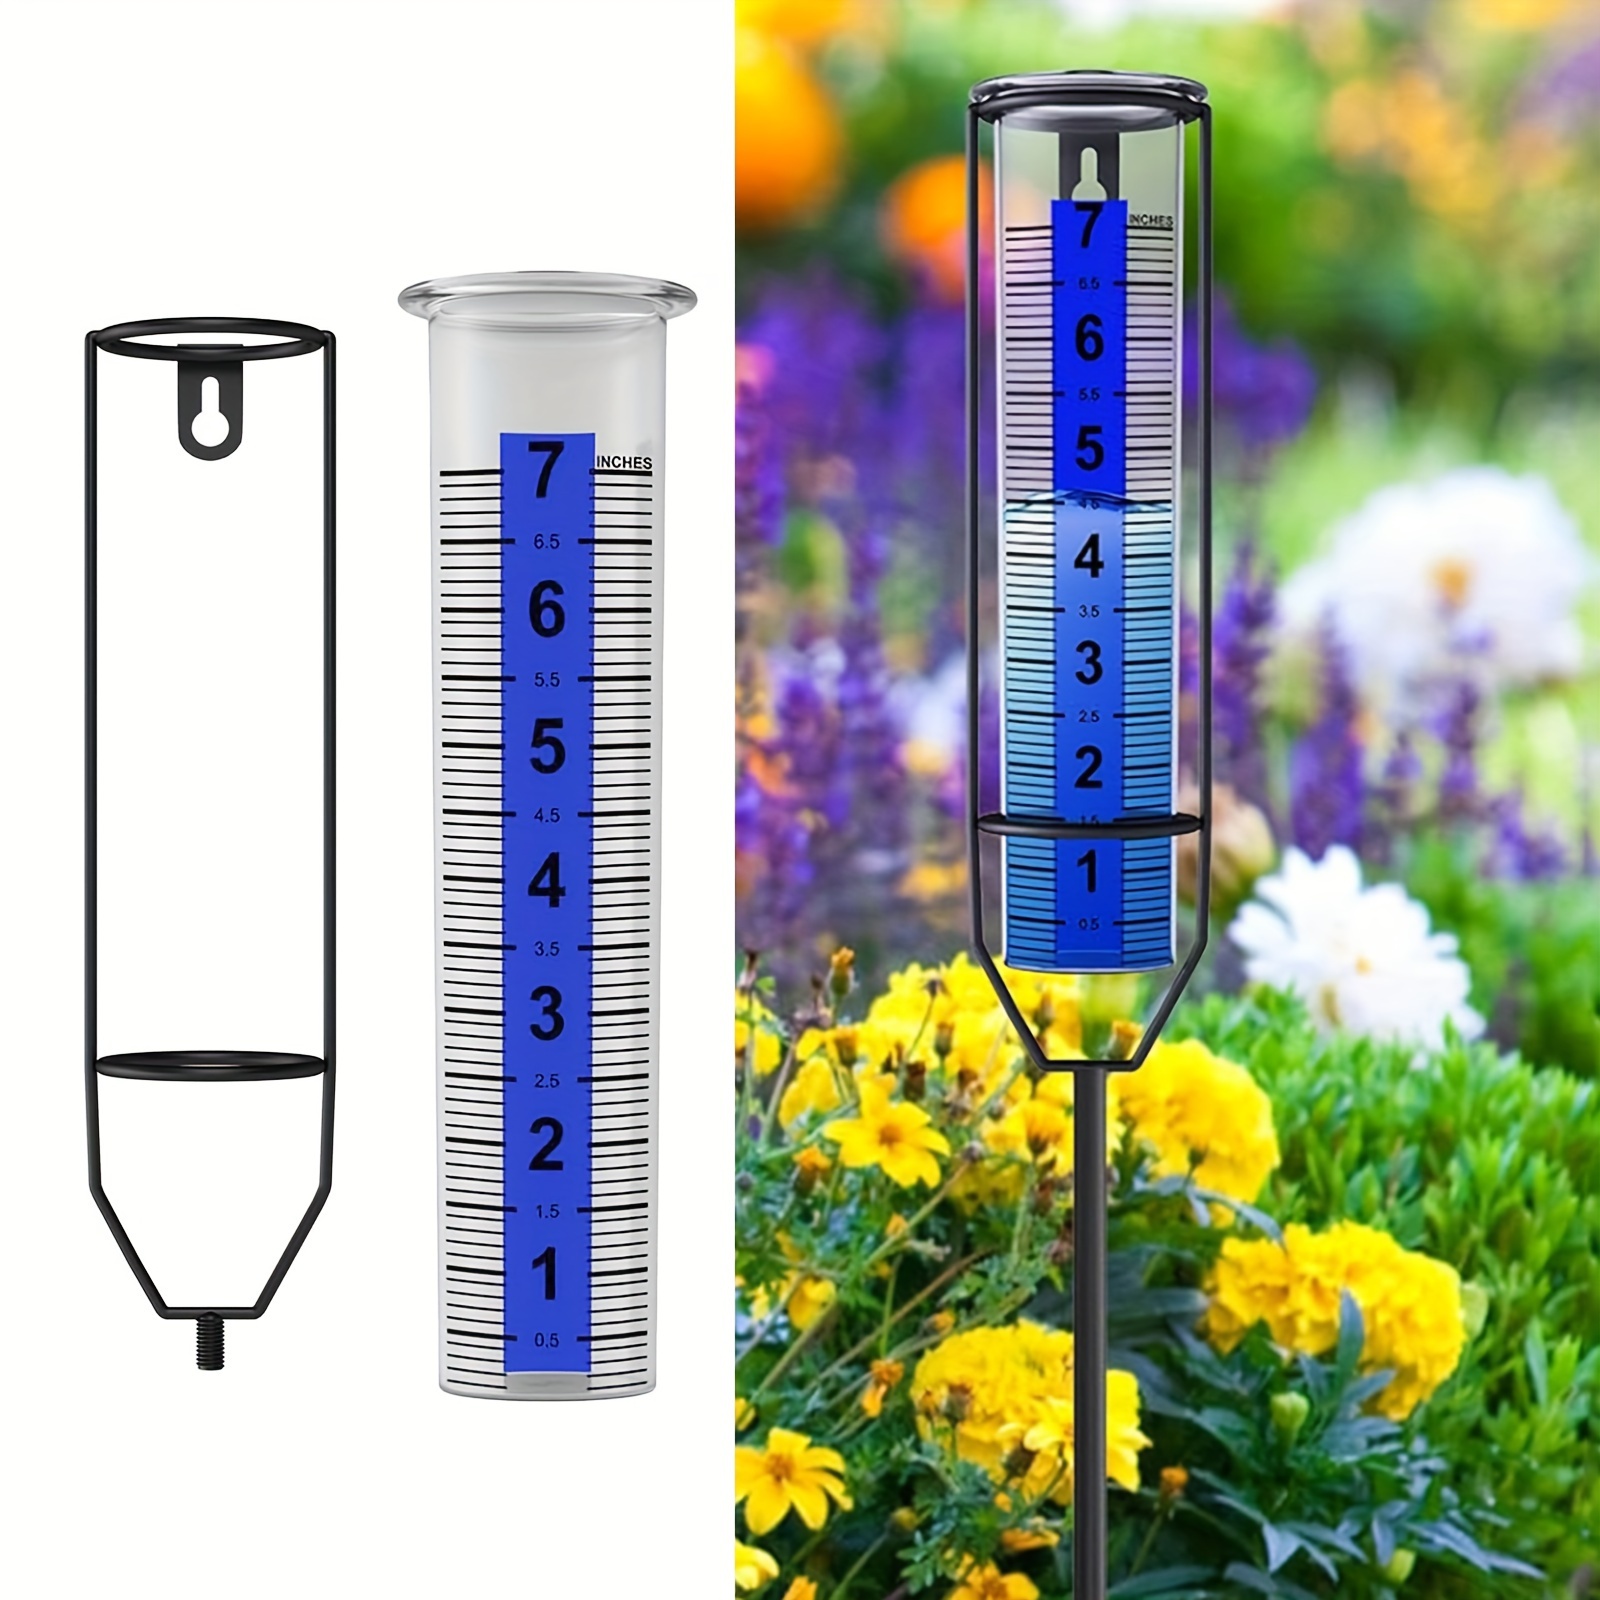 

Easy-read 8.26" Outdoor Rain Gauge With Stake - Durable Plastic, Blue Lettering, Perfect For Garden & Yard